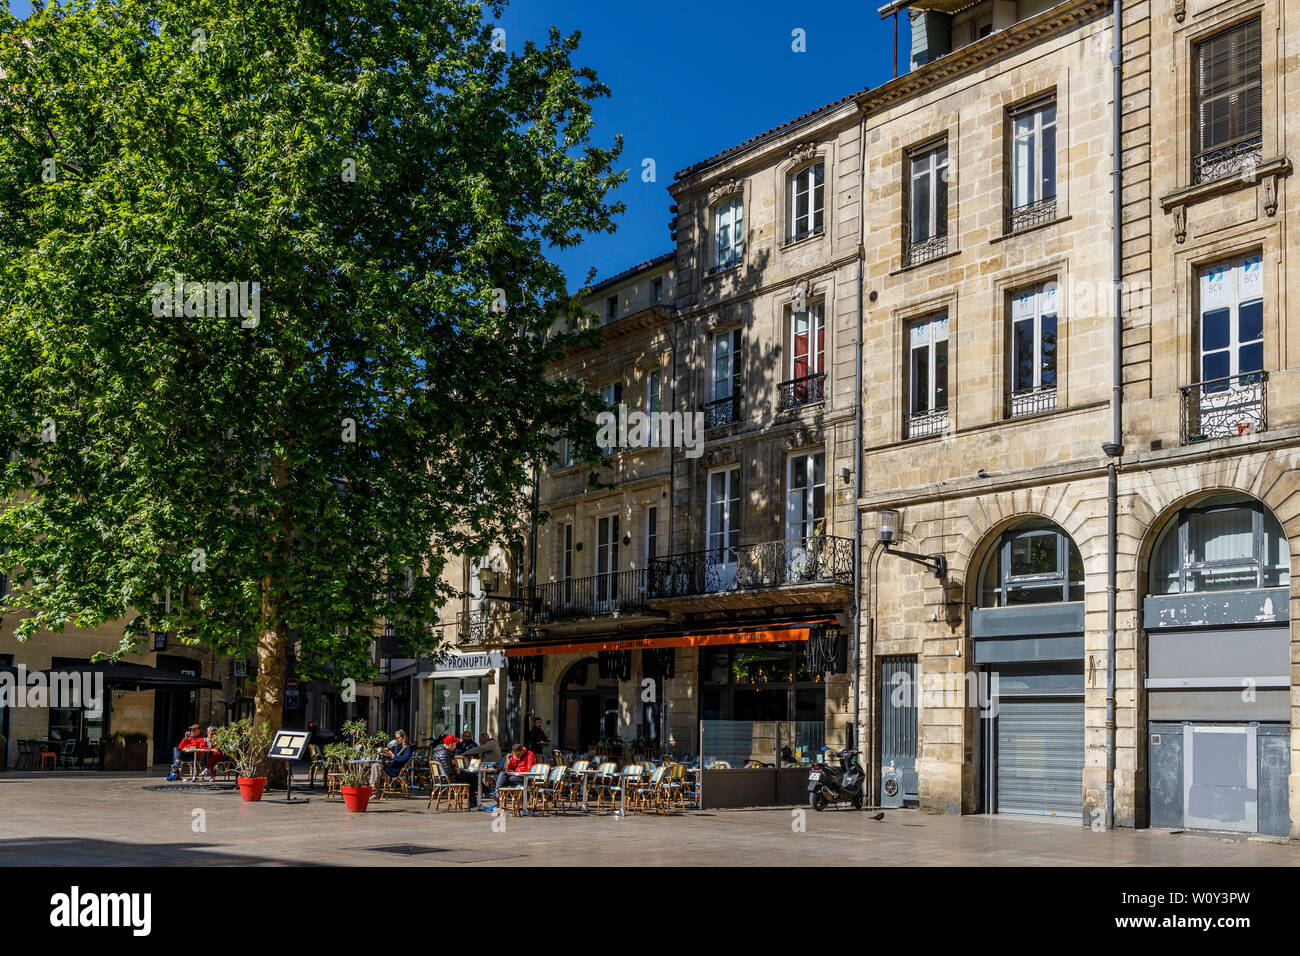 Place Saint-Projet with restaurants and cafes in a pedestrianised area, Bordeaux, Gironde, France. Stock Photo